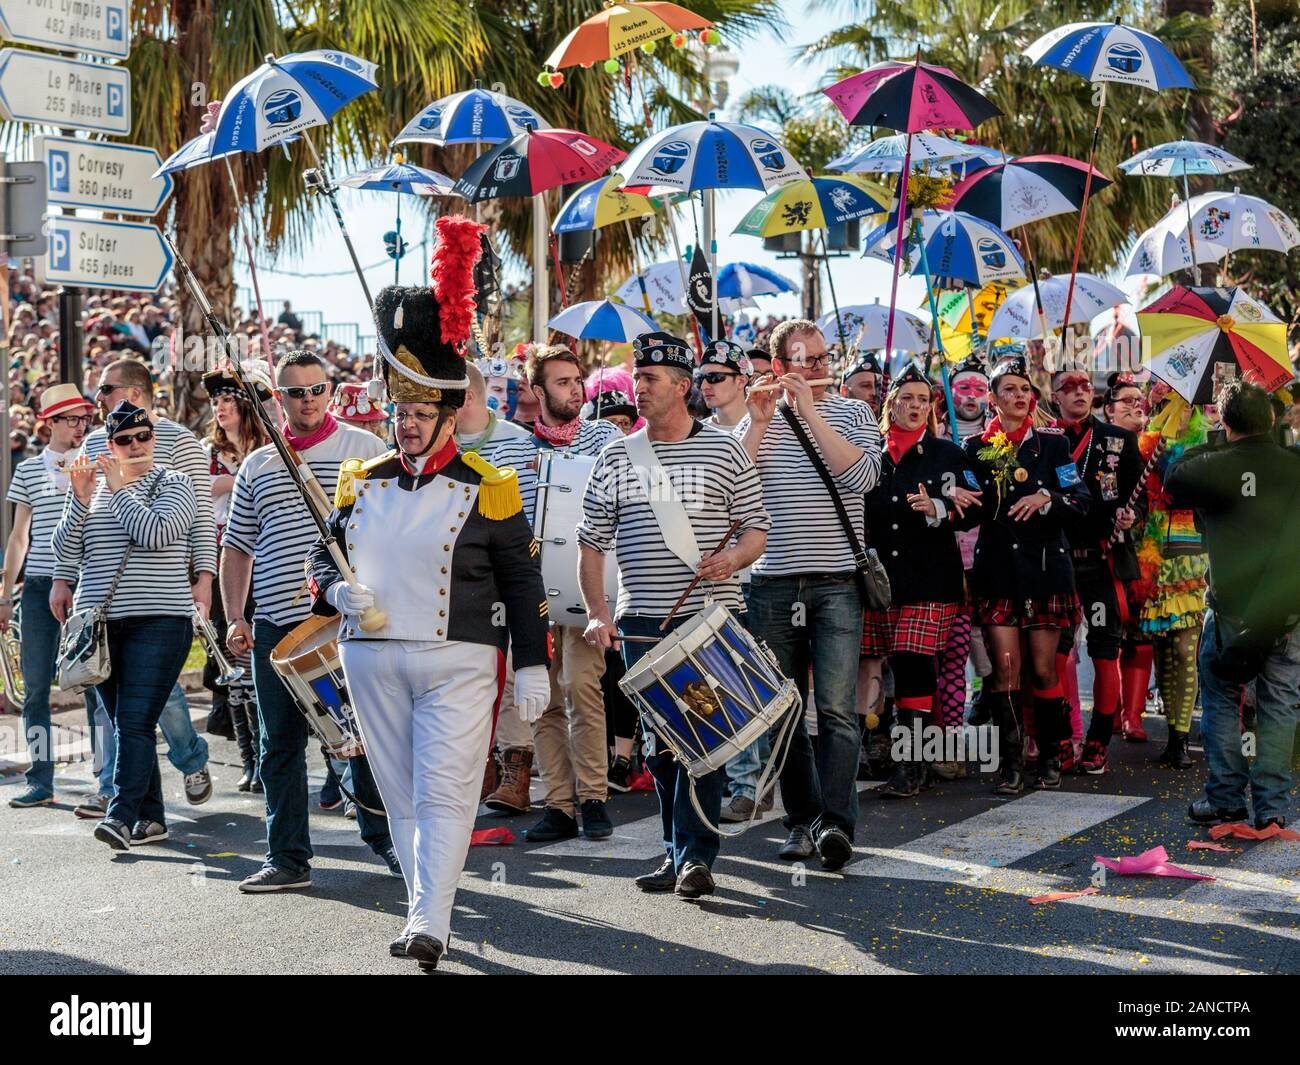 Marching band with umbrellas at the Flower Parade, Nice Carnival, French Riviera, Cote d'Azur, France. Stock Photo